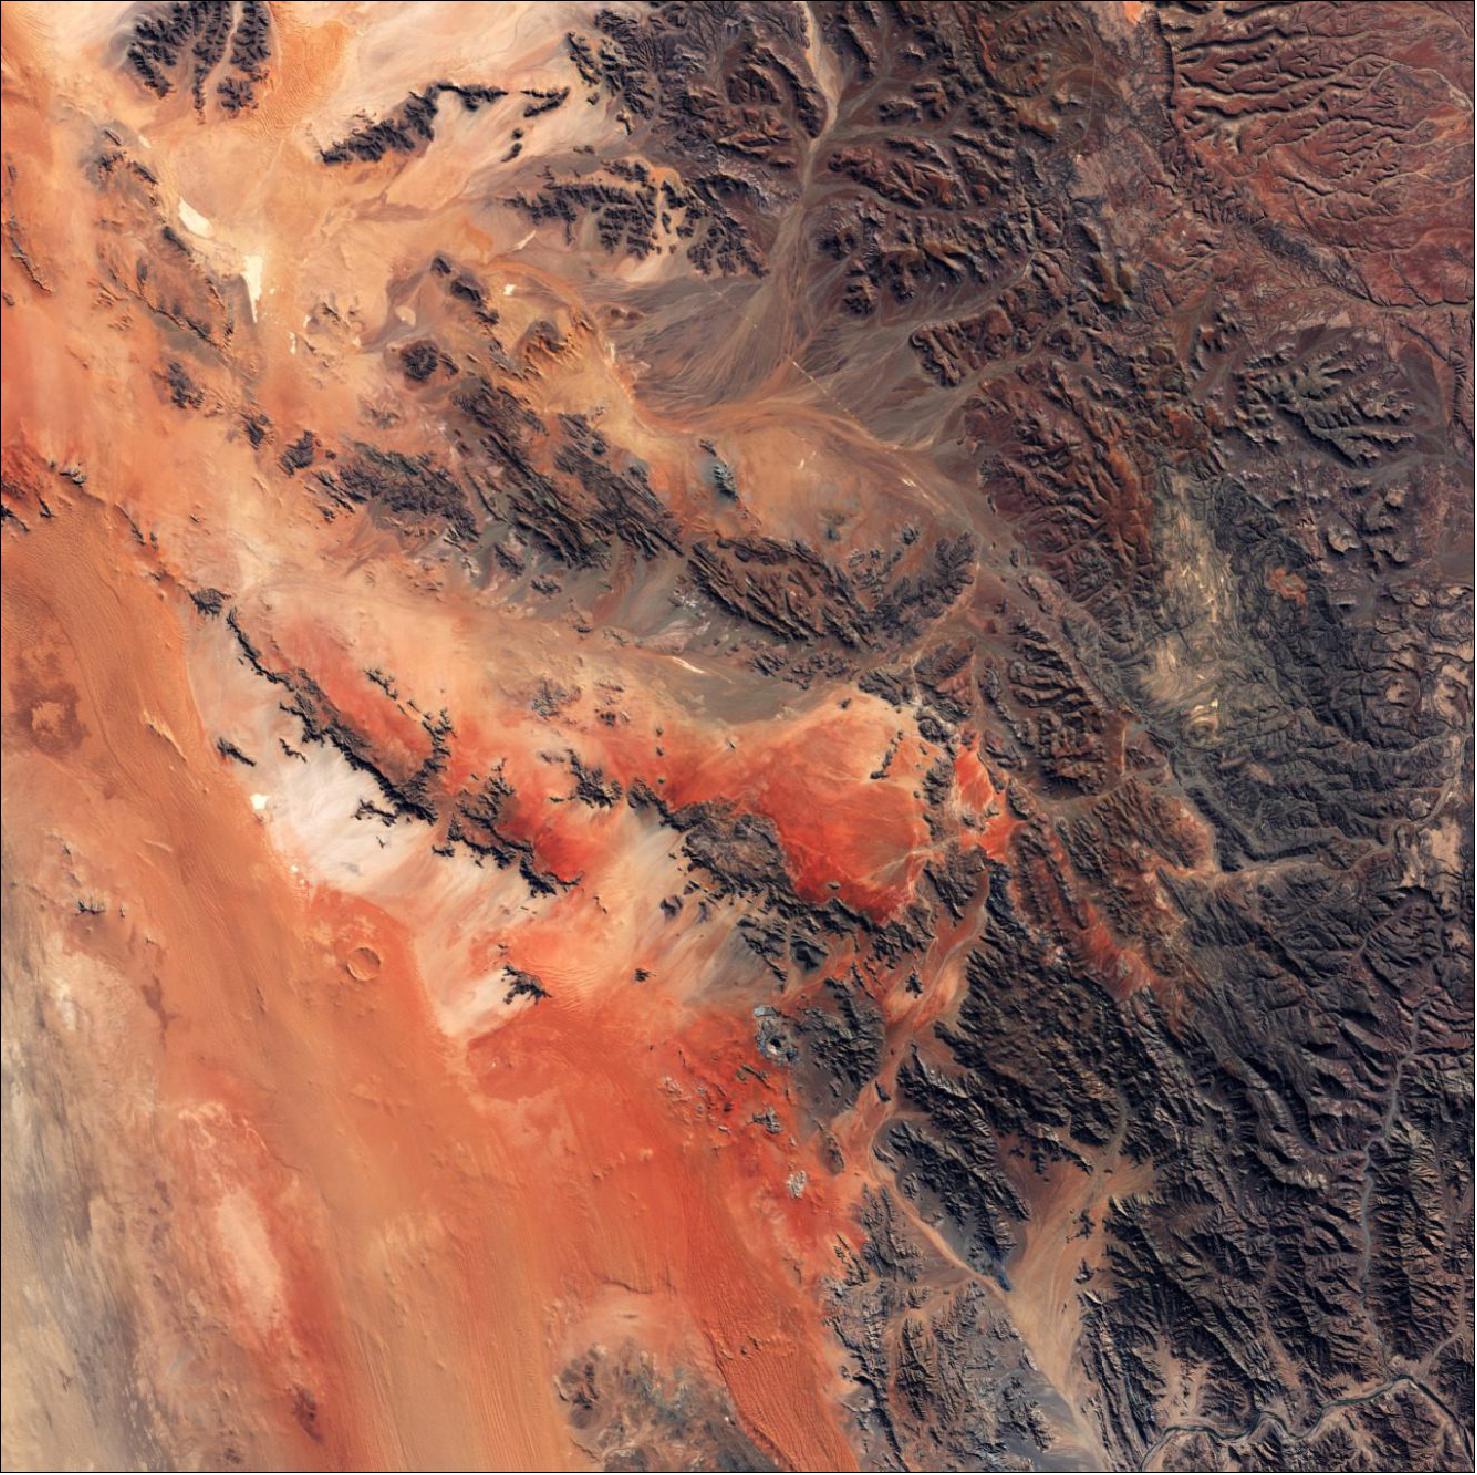 Figure 28: Image of the Roter Kamm impact crater in Namibia, acquired with Sentinel-2. The circular shape of the crater rim can be seen in the left of the image, just below the center (image credit: ESA, the image contains modified Copernicus Sentinel data (2020), processed by ESA, CC BY-SA 3.0 IGO)